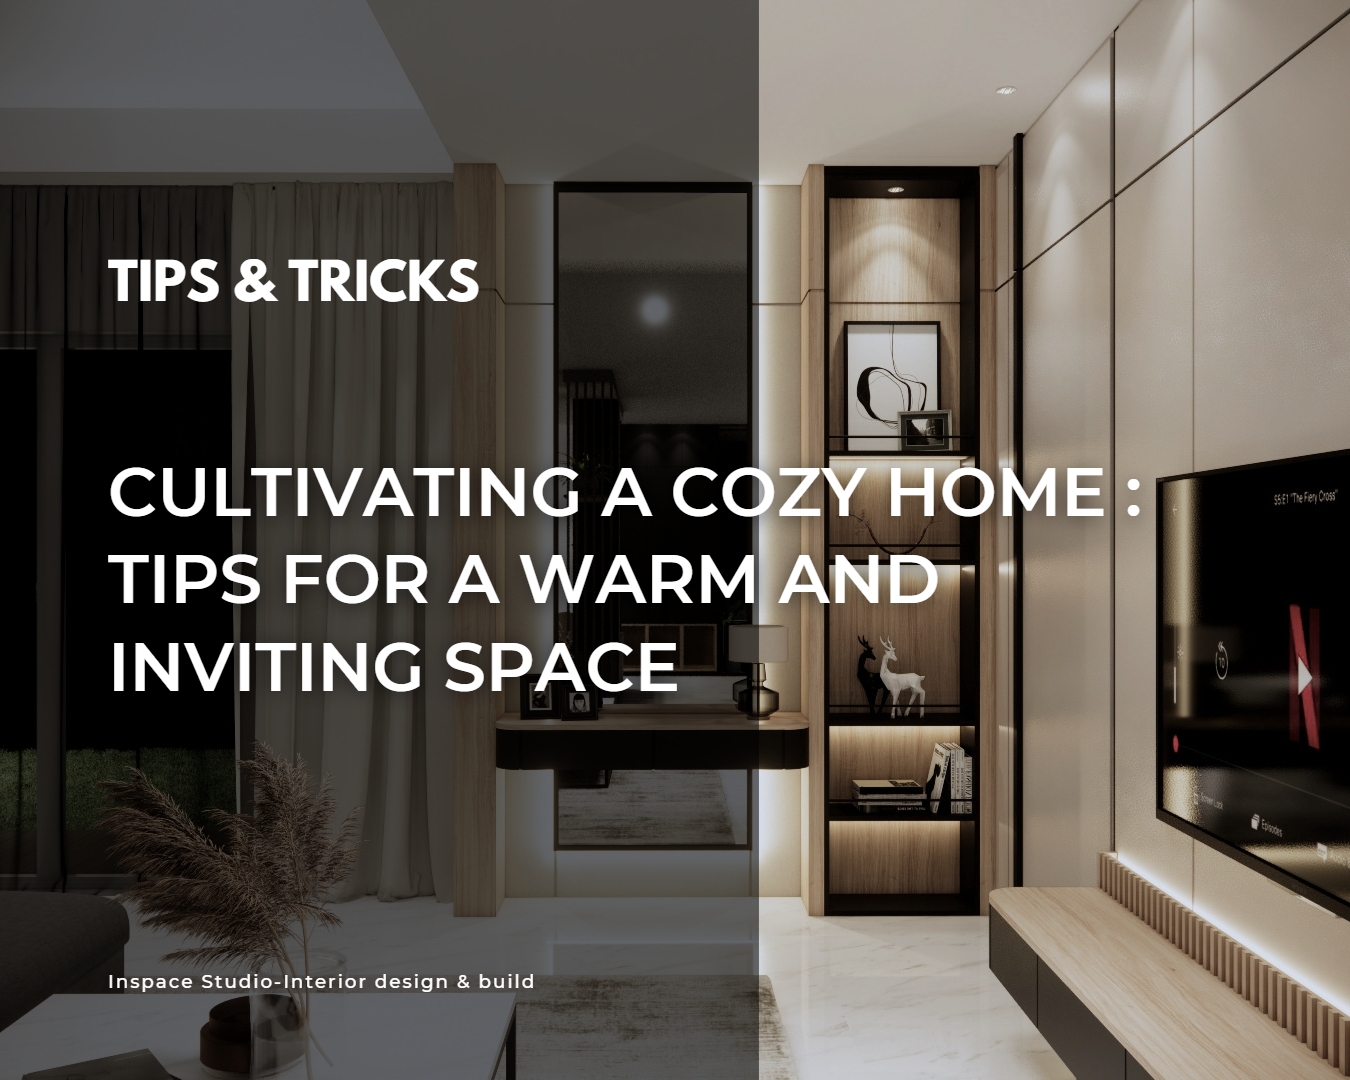 Tips for a warm and inviting space